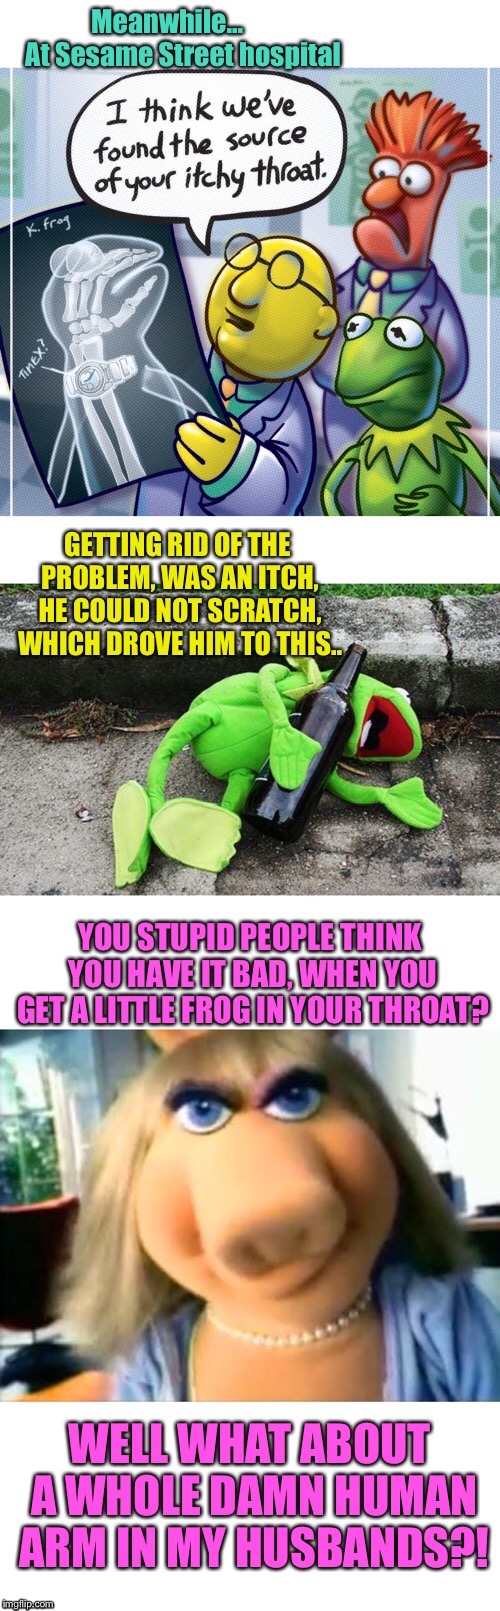 Kermits eventual fate, is in our hands.  | image tagged in memes,sesame street,kermit the frog,miss piggy,funny,stories | made w/ Imgflip meme maker